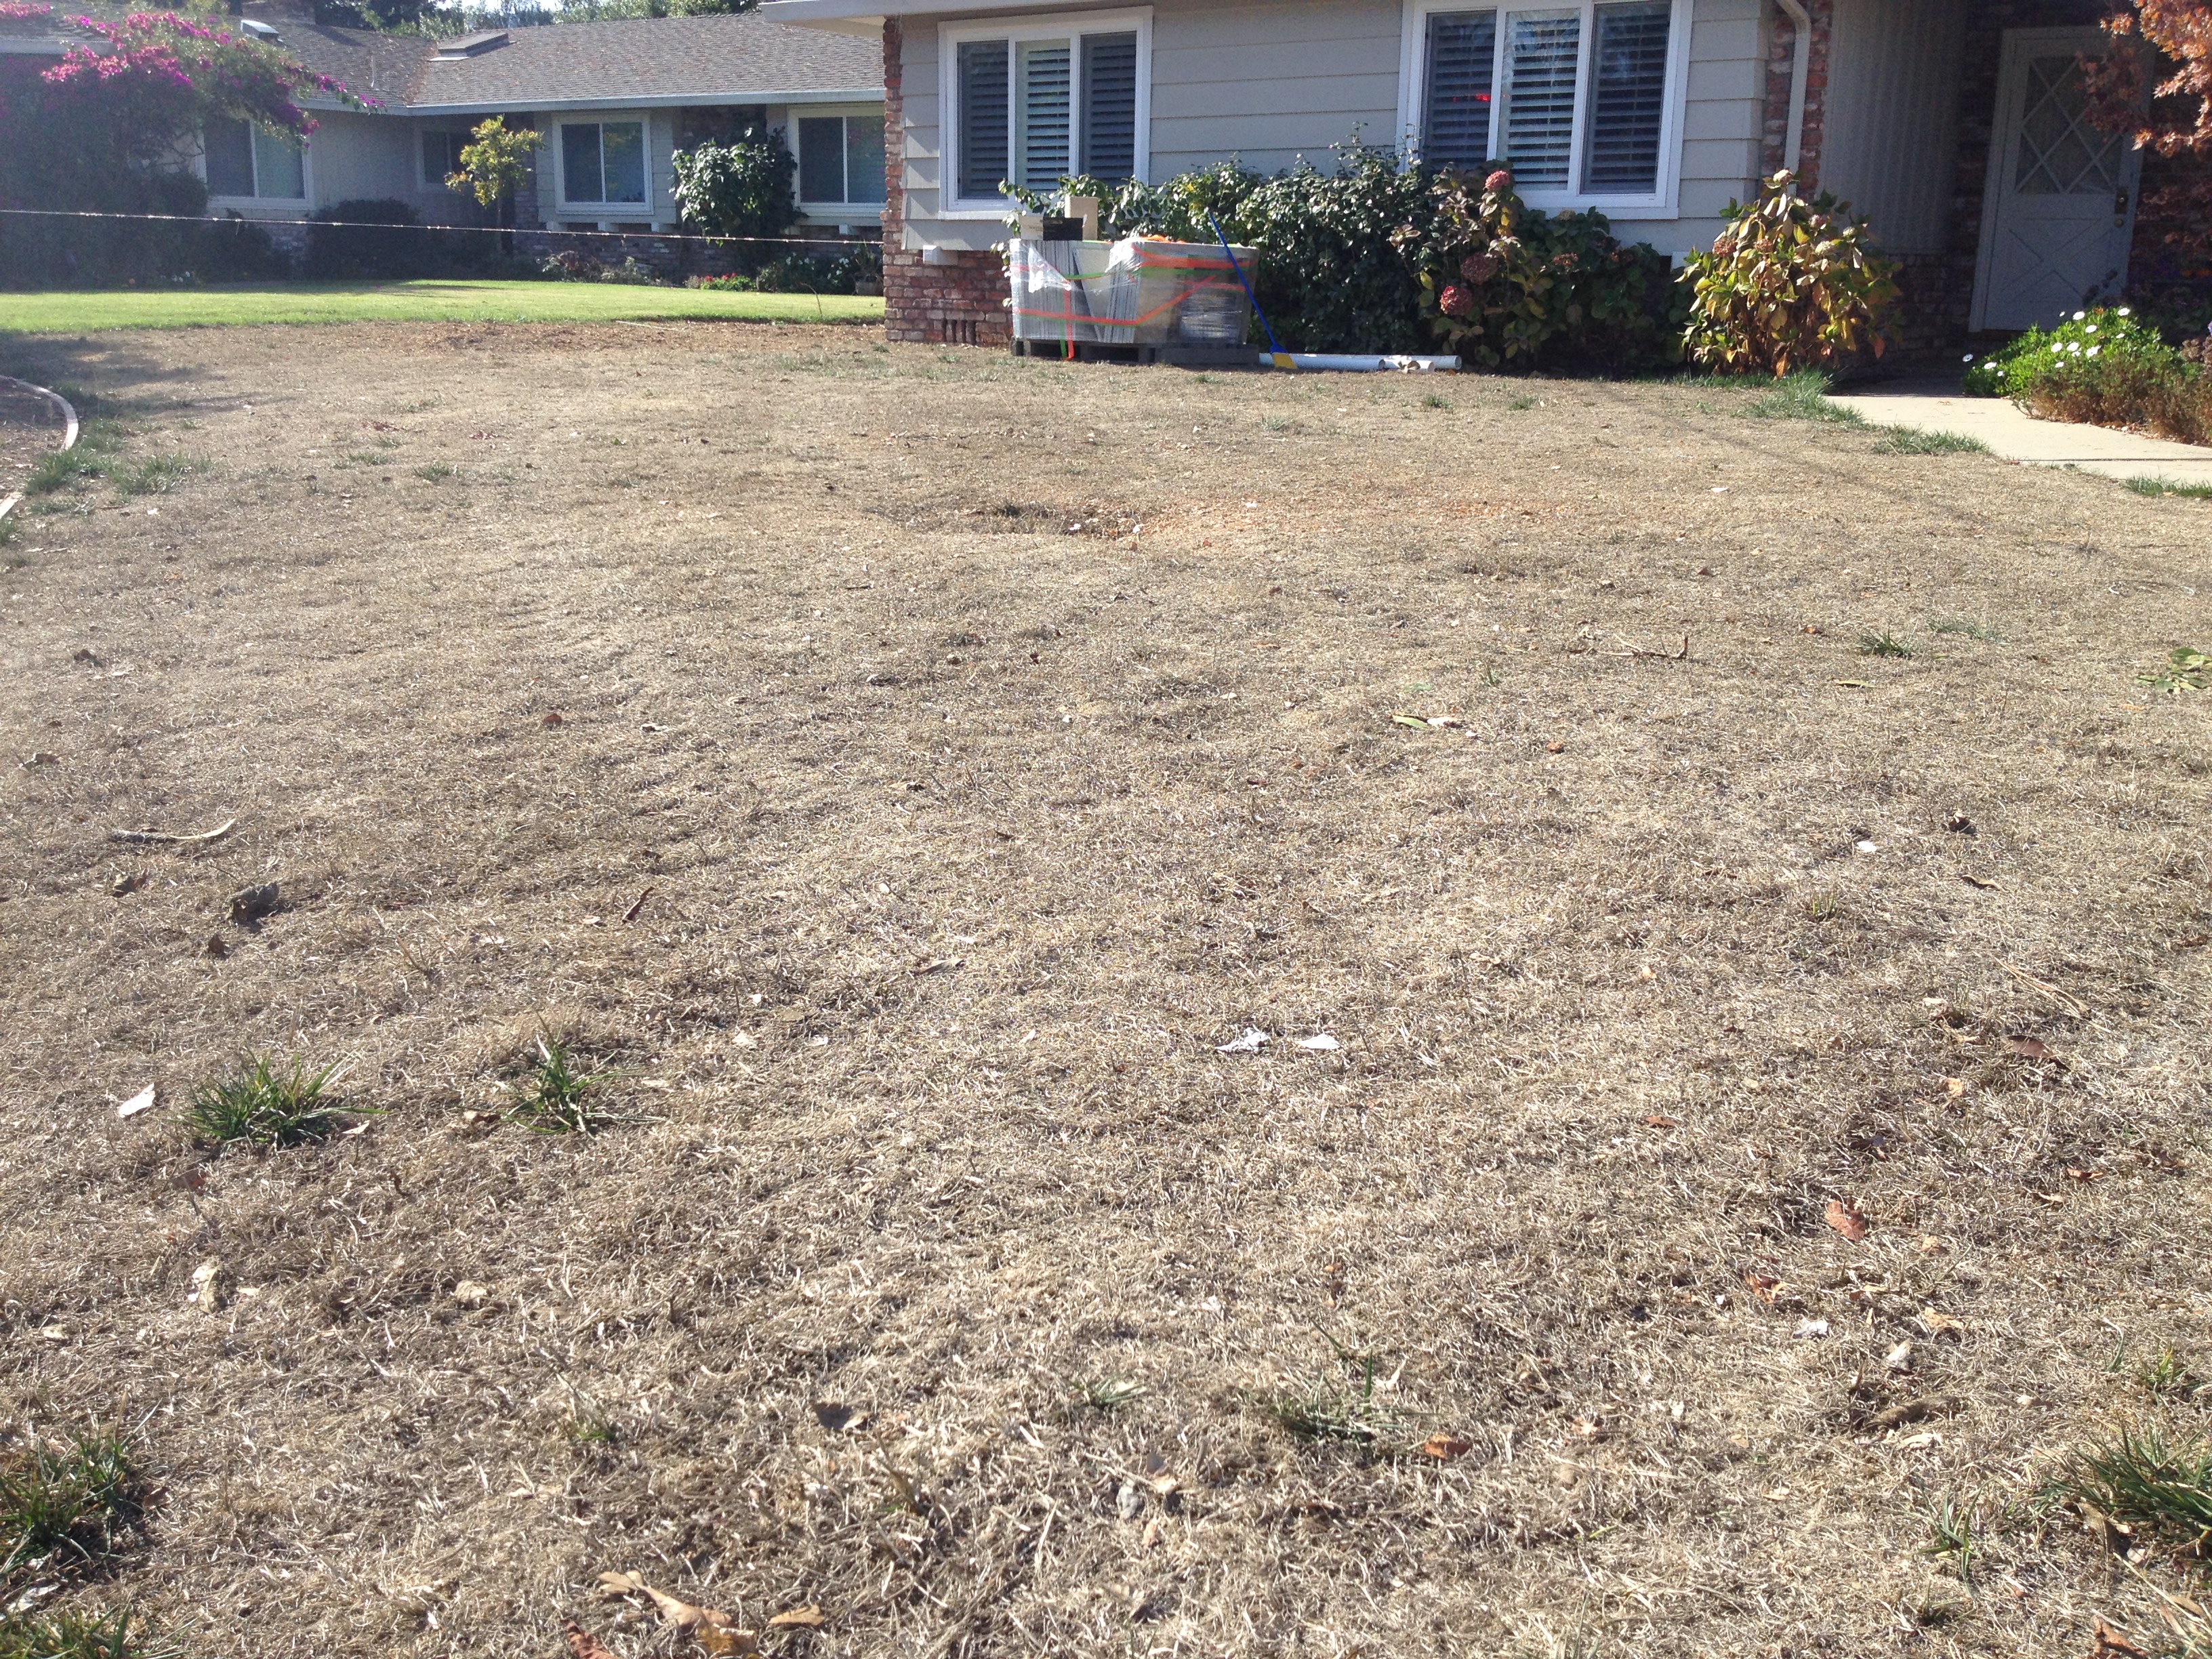 Los Altos resident Rebecca Lowell let her lawn die over the summer, and is planning to replace it, with help via a rebate from the Santa Clara Valley Water District. (Daniel Potter/KQED)